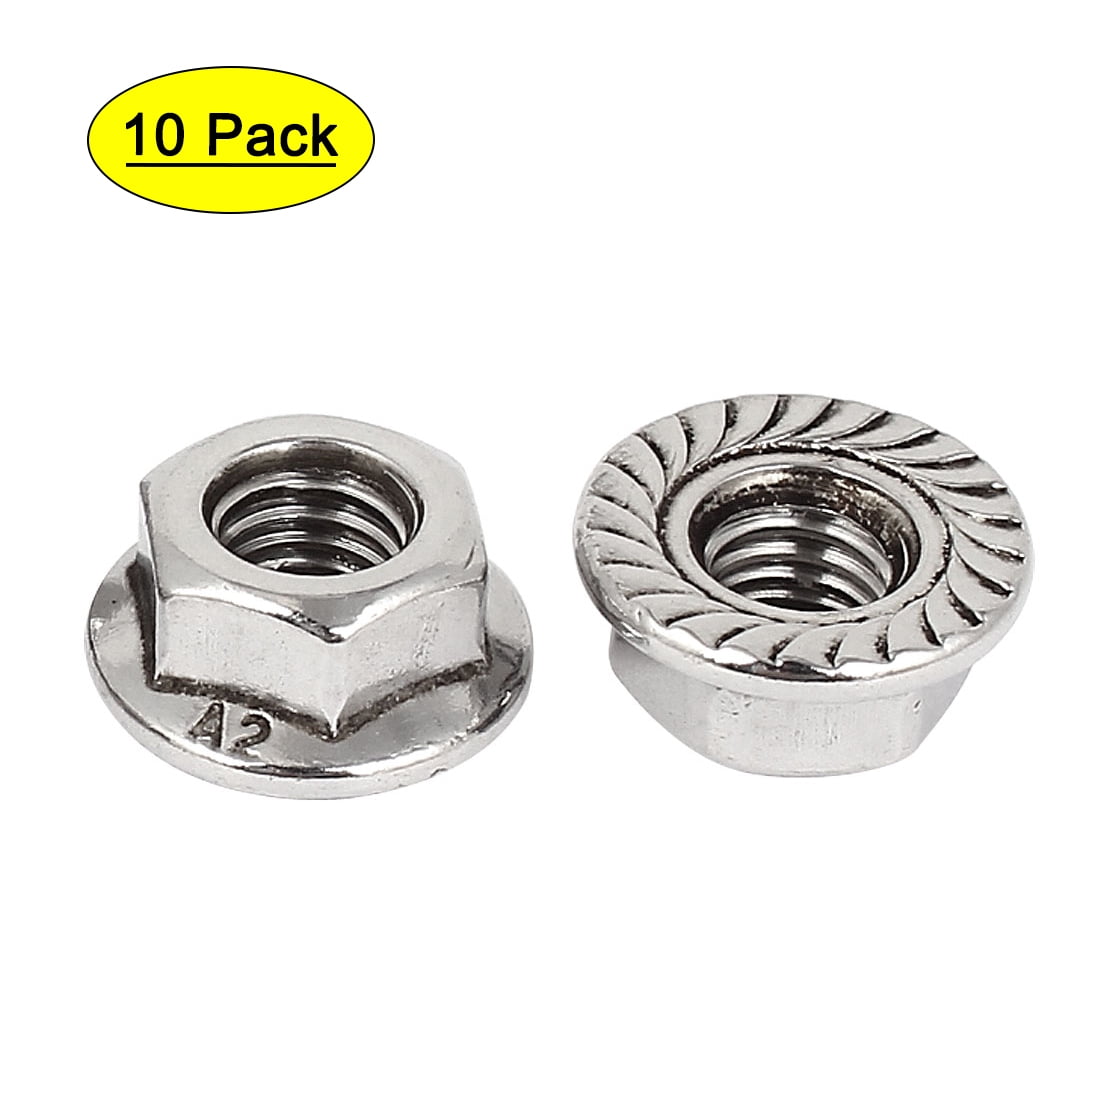 UNC 1/4" 3/8" 5/16" Flanged Hex Nuts Serrated A2 Stainless steel Flange Nut 